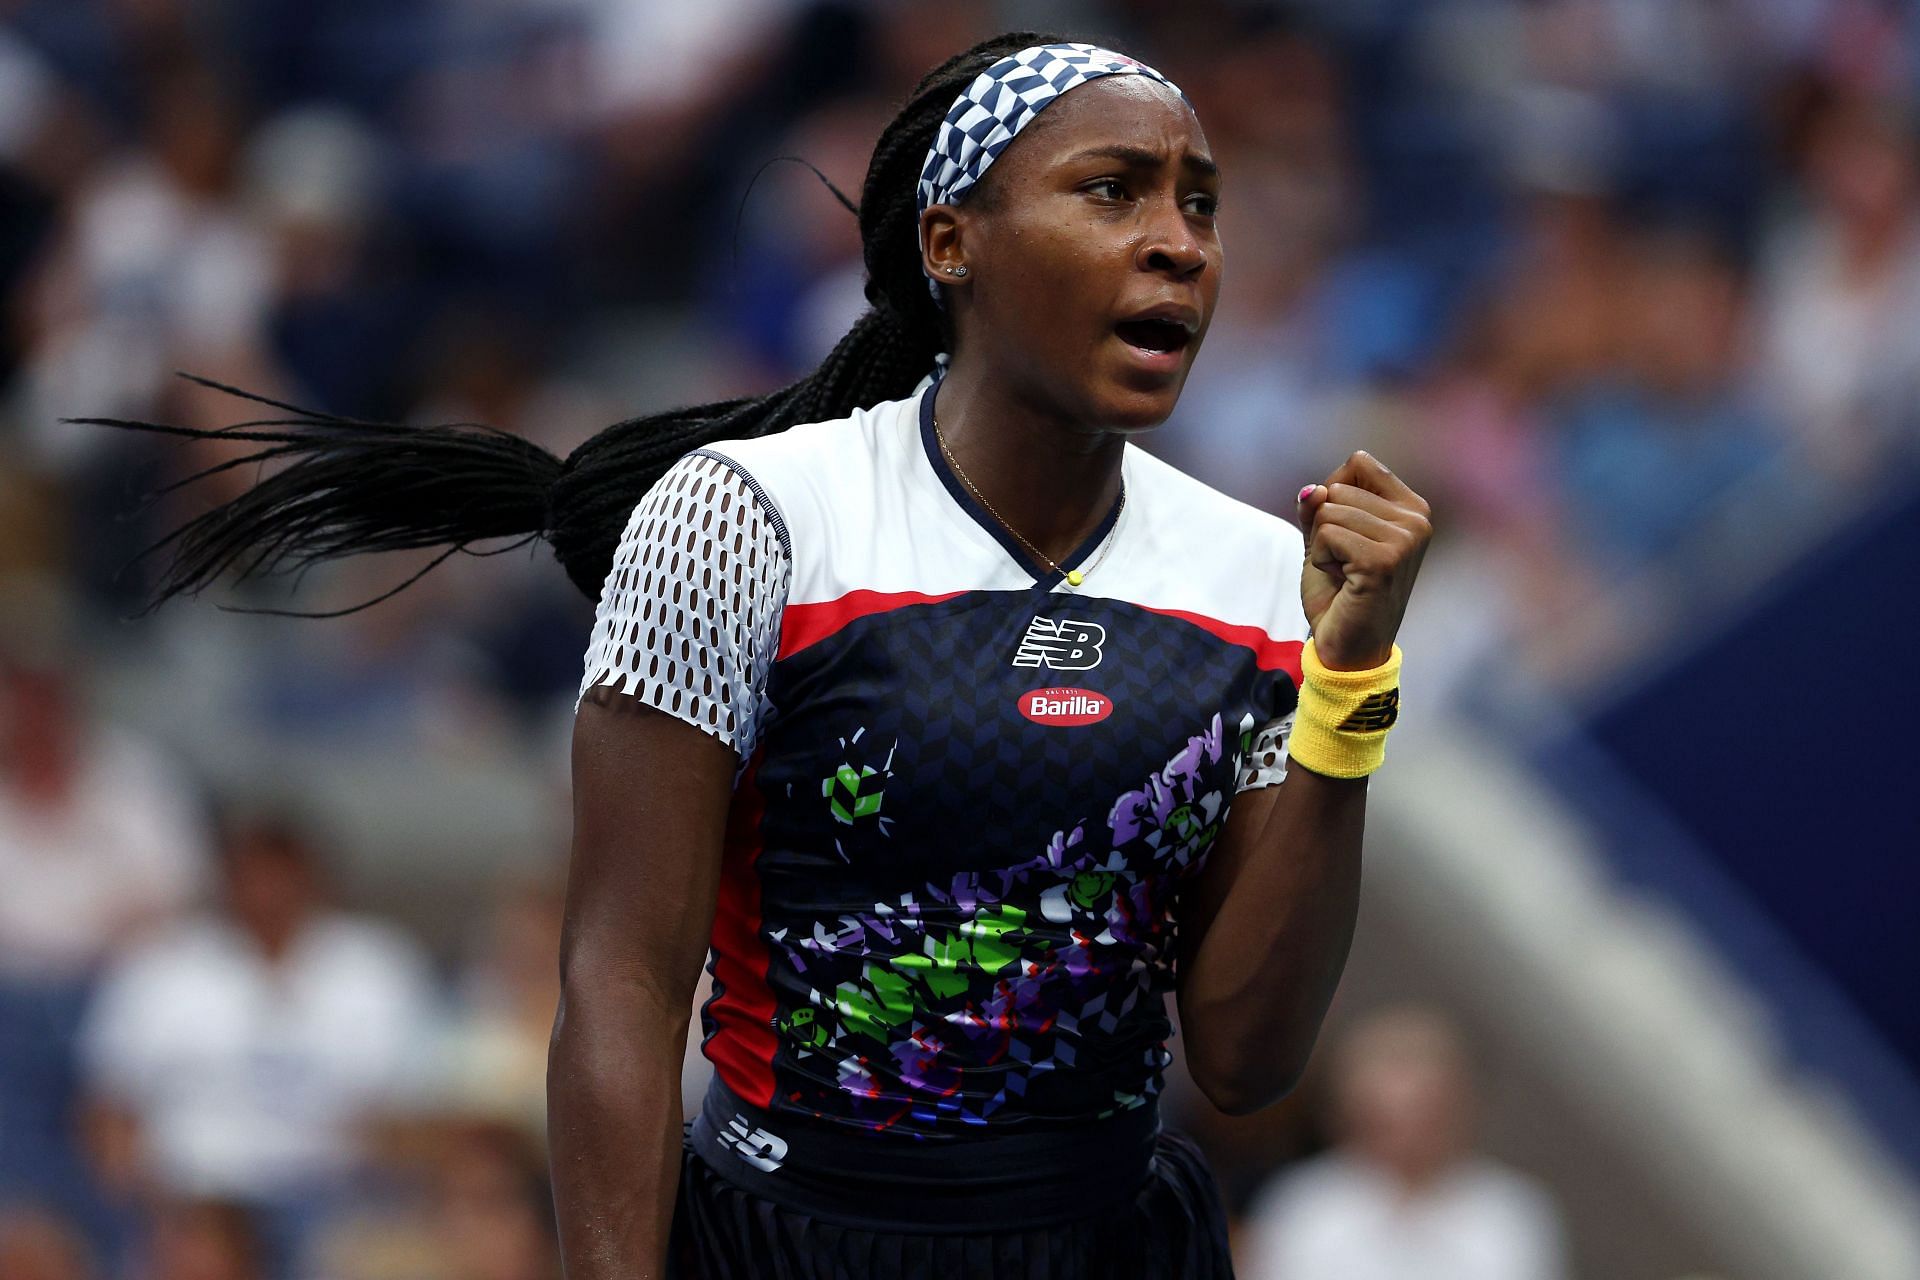 Coco Gauff during Day 7 of the 2022 US Open